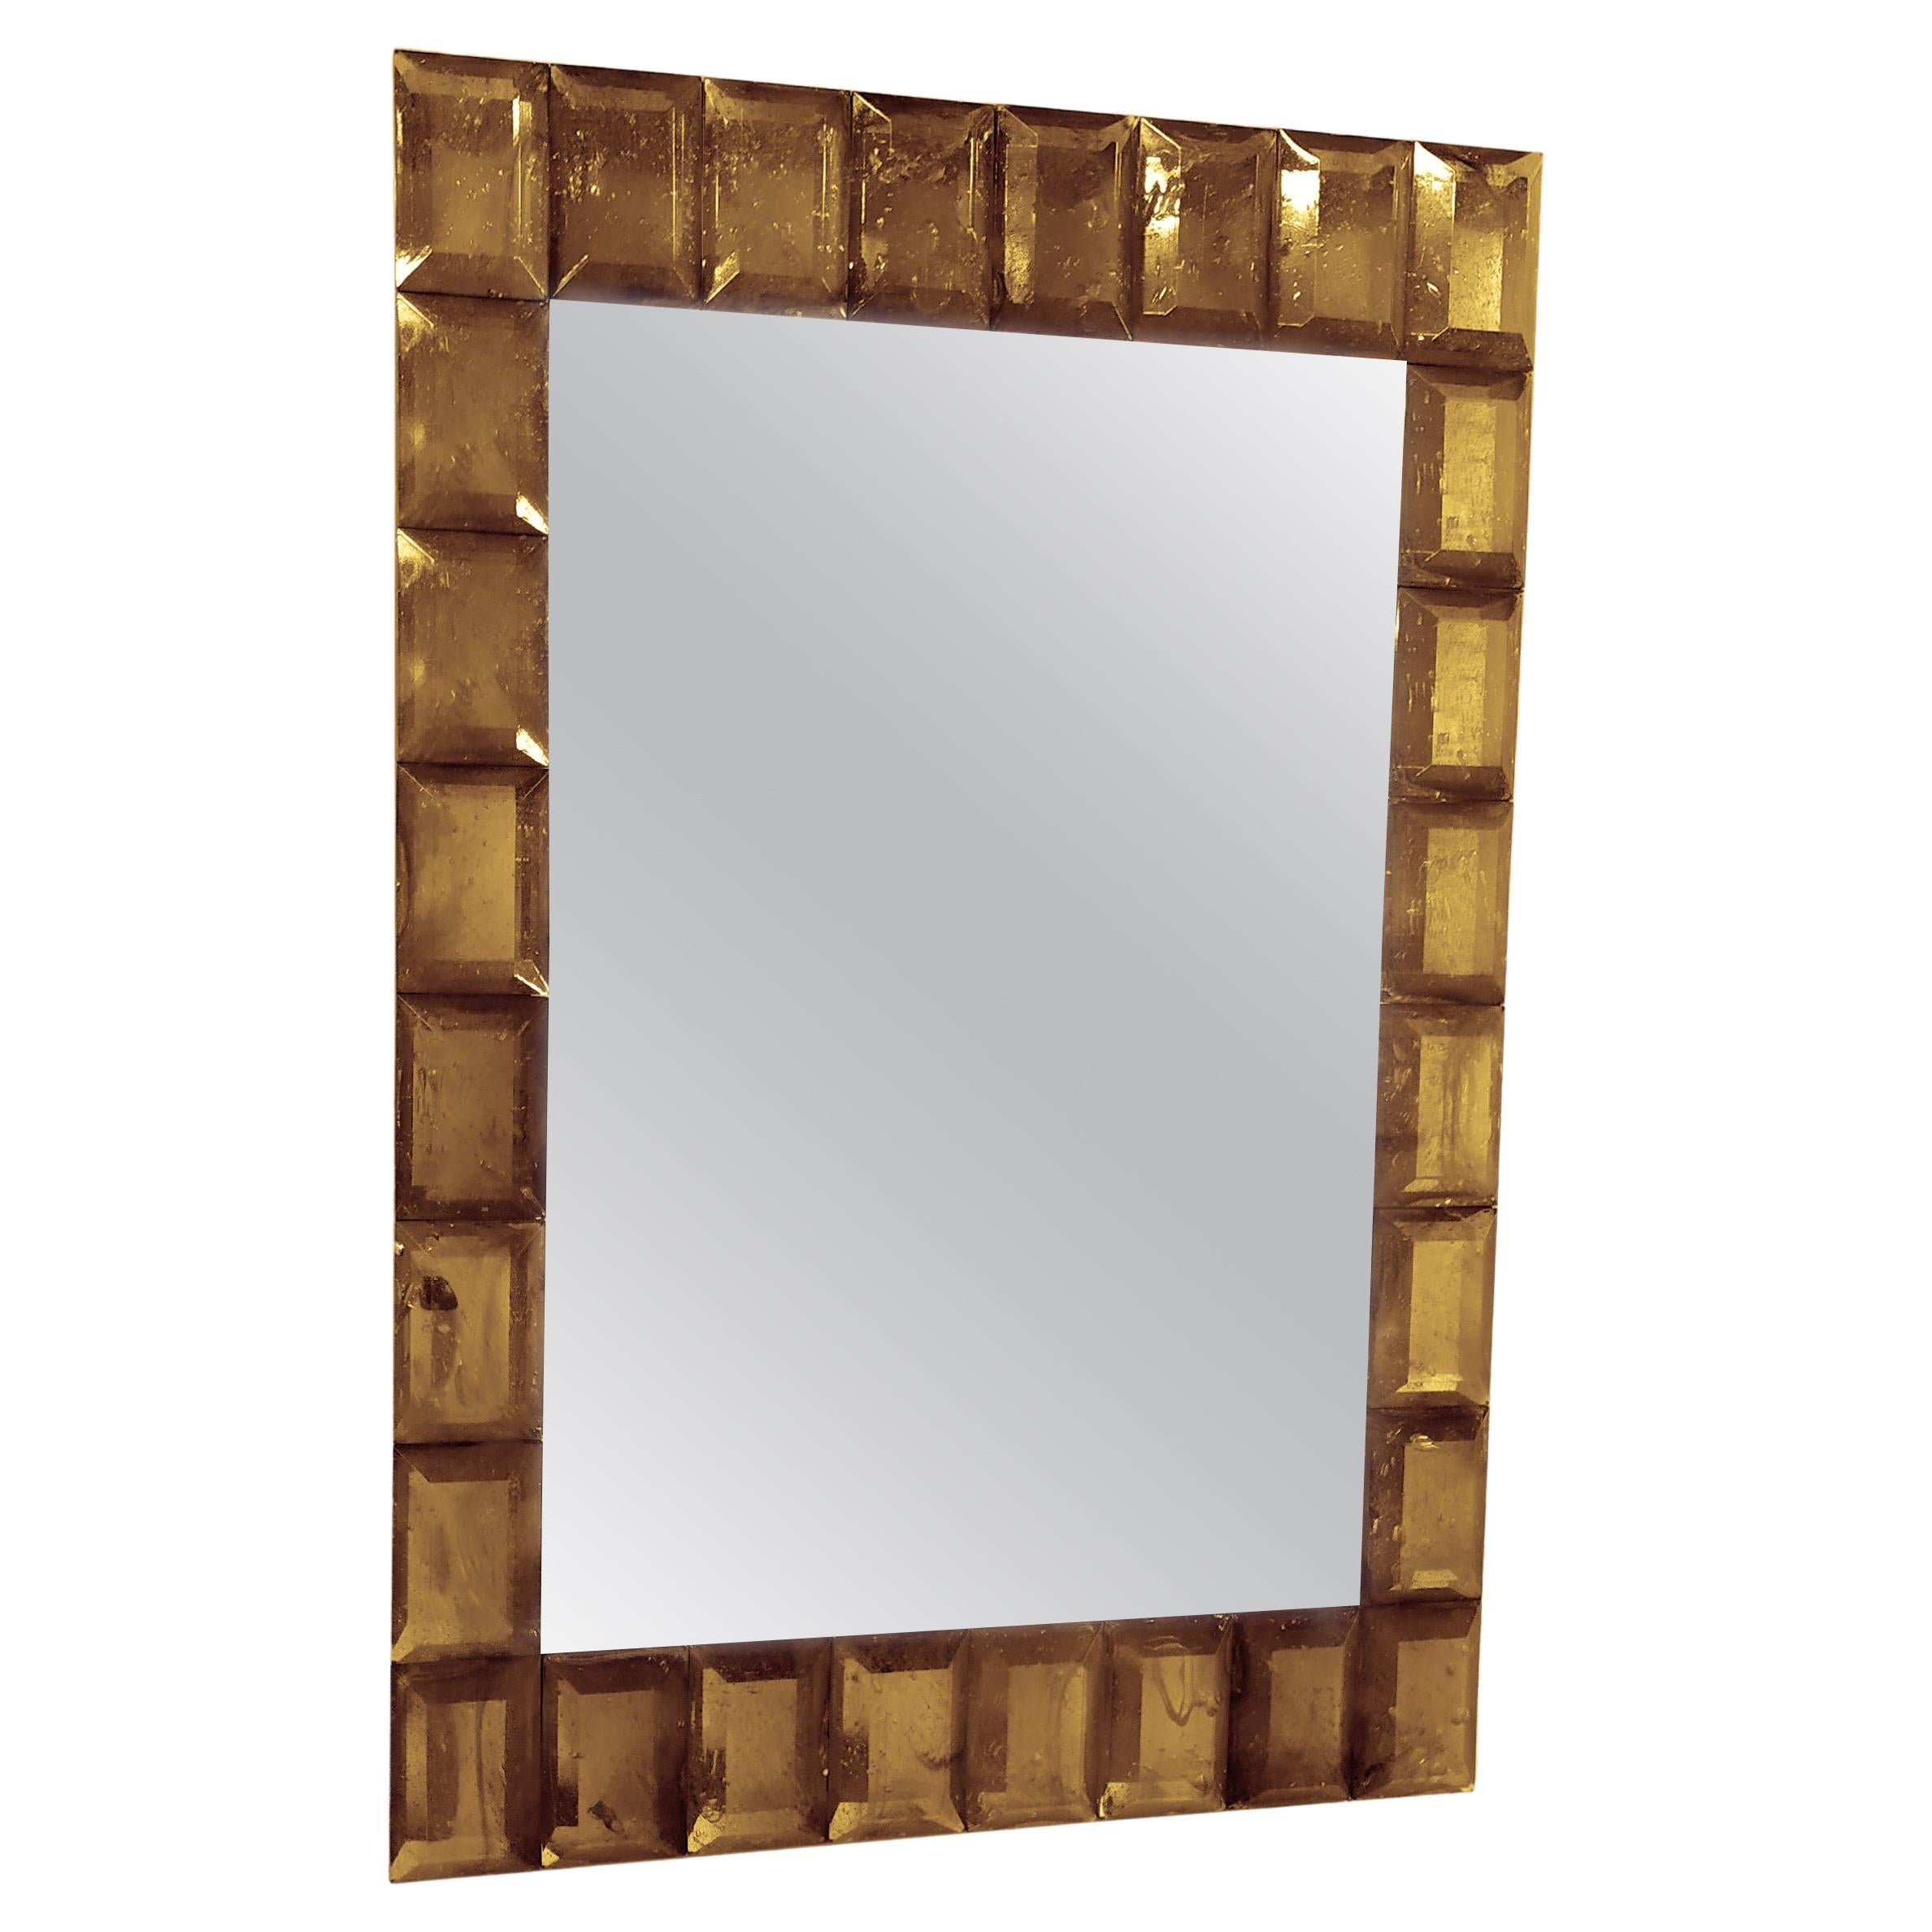 "Amber" Murano Glass Mirror in Contemporary Style by Fratelli Tosi For Sale